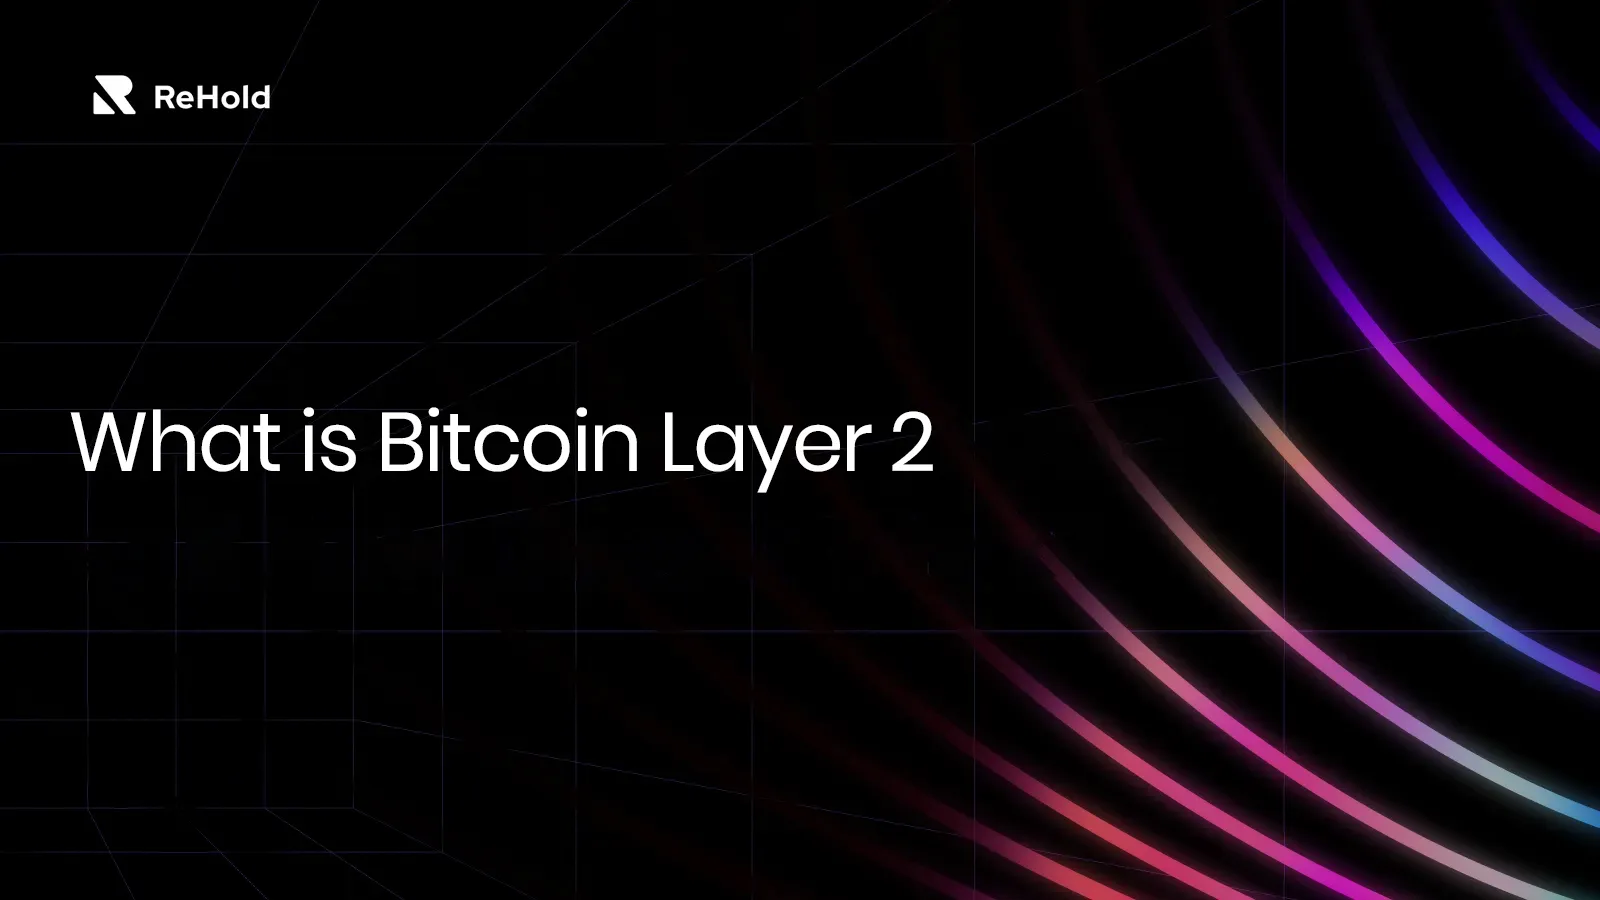 What is Bitcoin Layer 2?